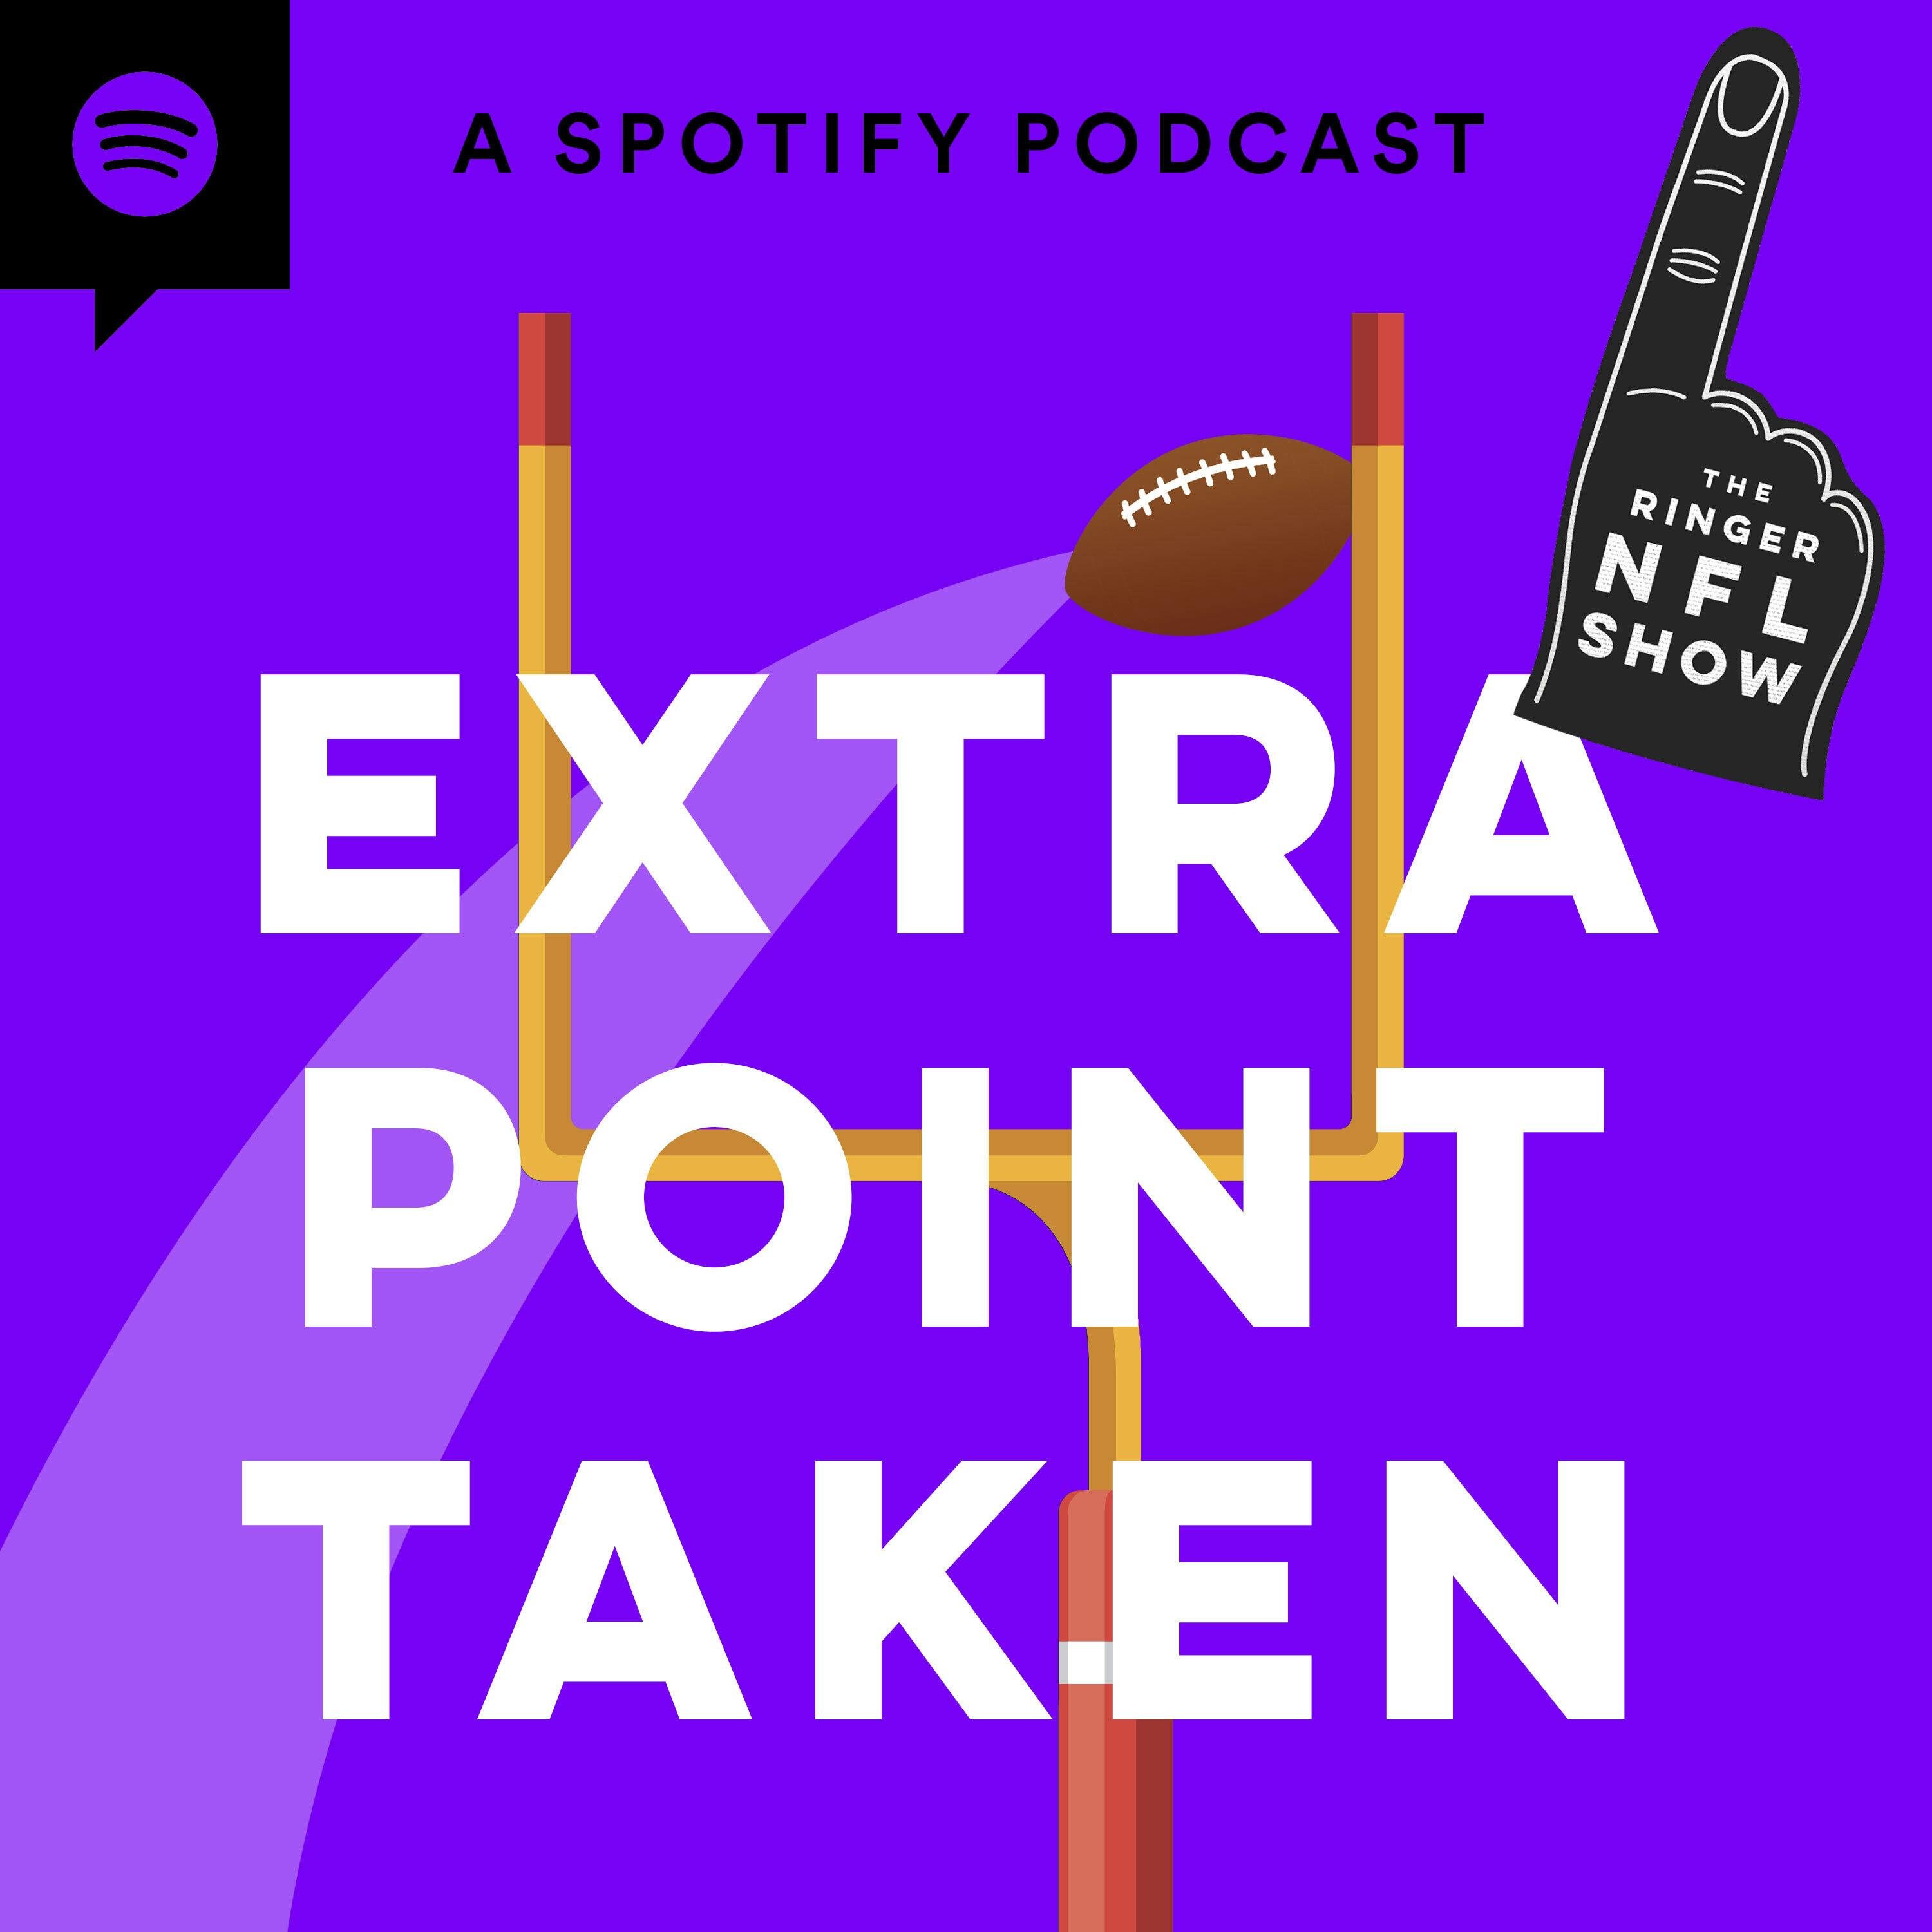 The Confusing Brian Burns Trade, Kirk Cousins’s Fit With the Falcons, and Much More! | Extra Point Taken